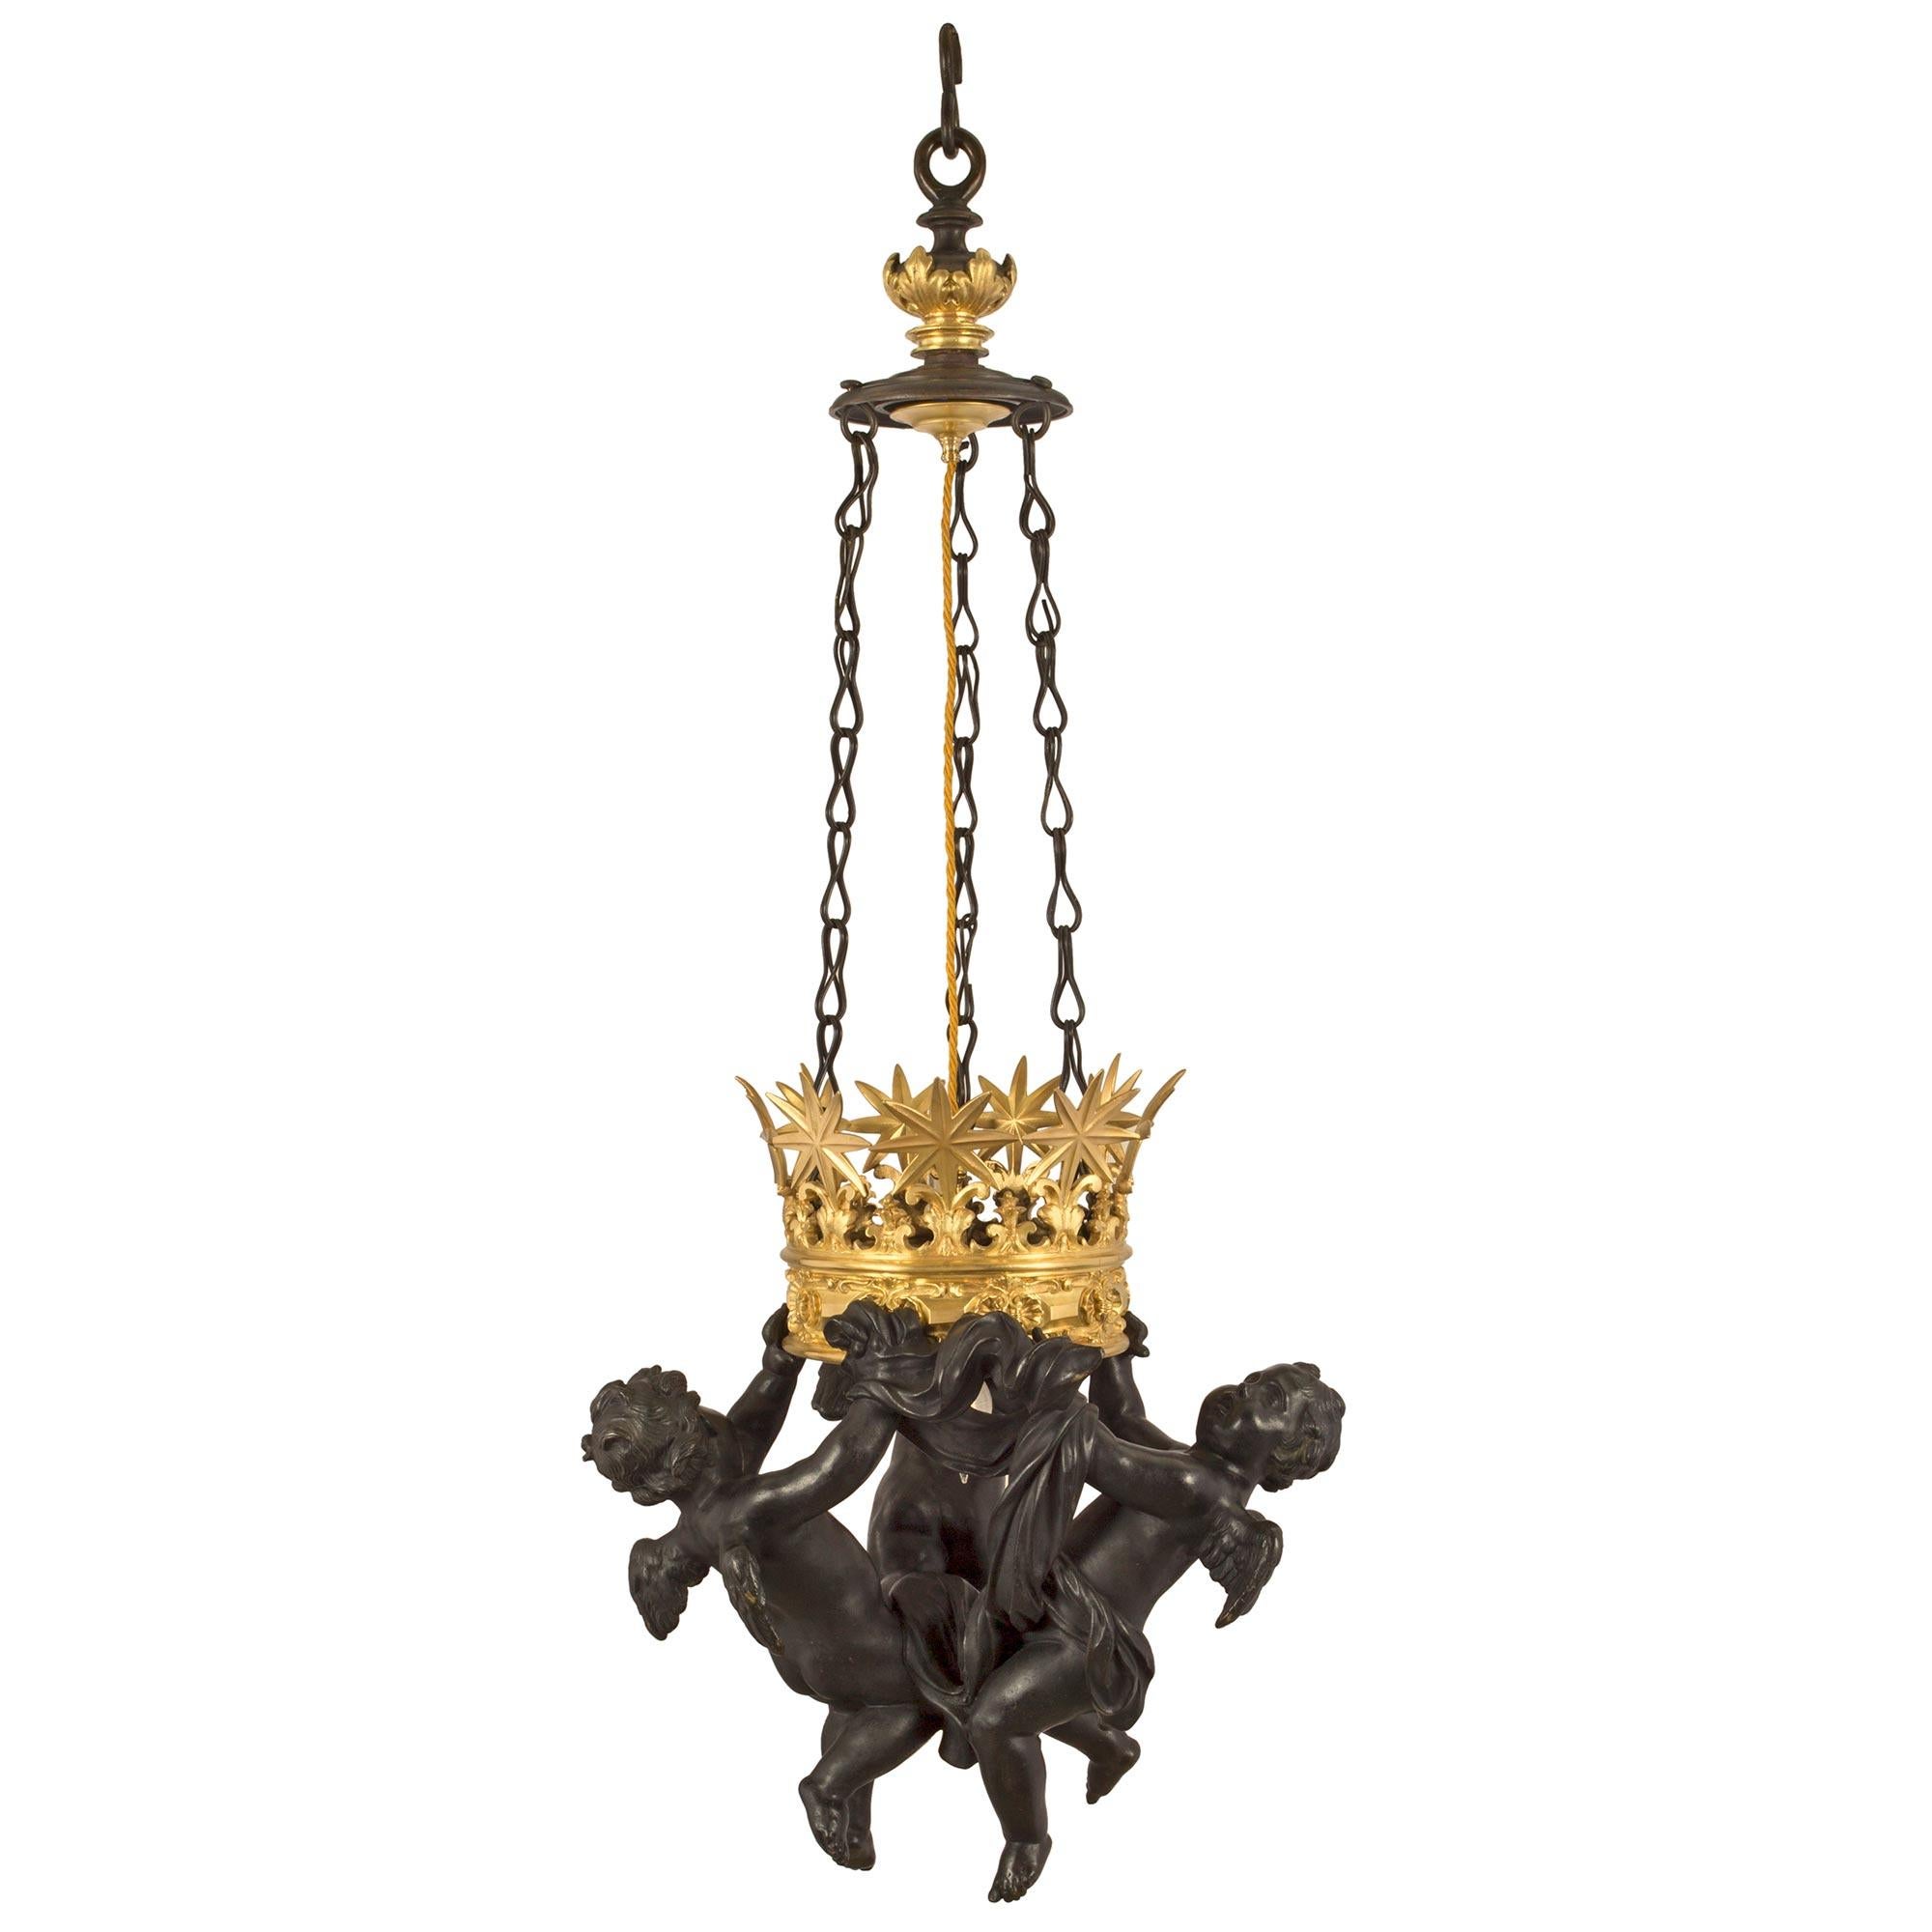 A most unique and high quality Italian 19th century Neo-Classical st. patinated bronze and ormolu hanging lantern. The lantern has three charming and expressive winged cherubs with rich and warm patina. The cherubs are holding to a fanciful and most